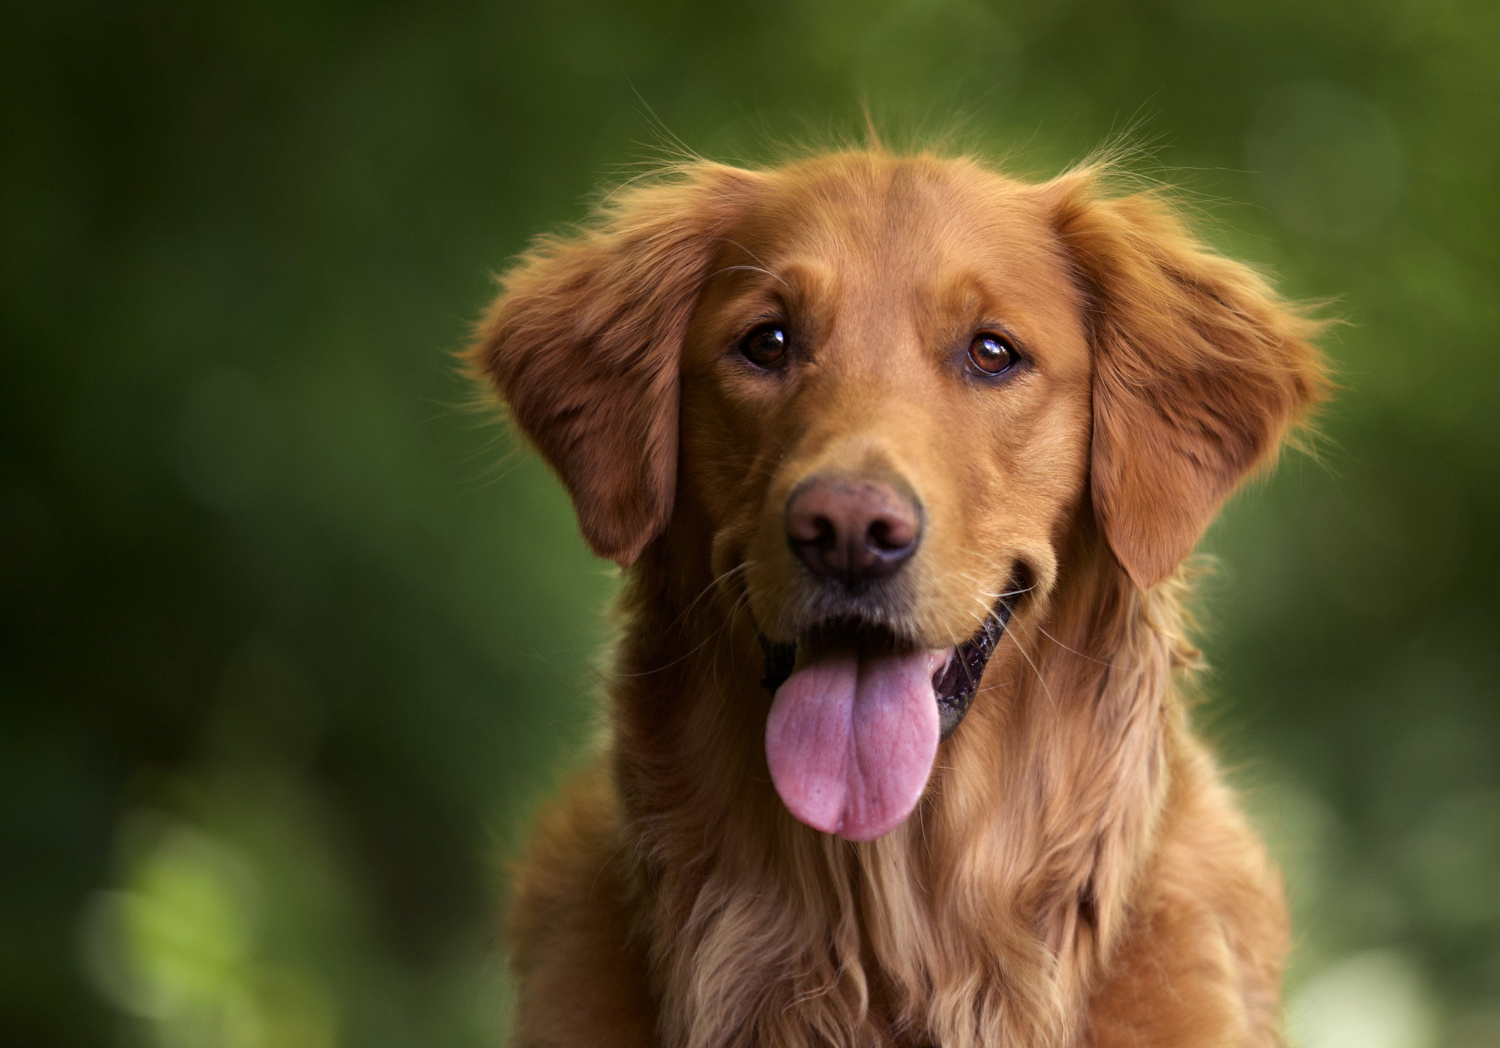 why is the tsh high in dogs who have hypothyroidism